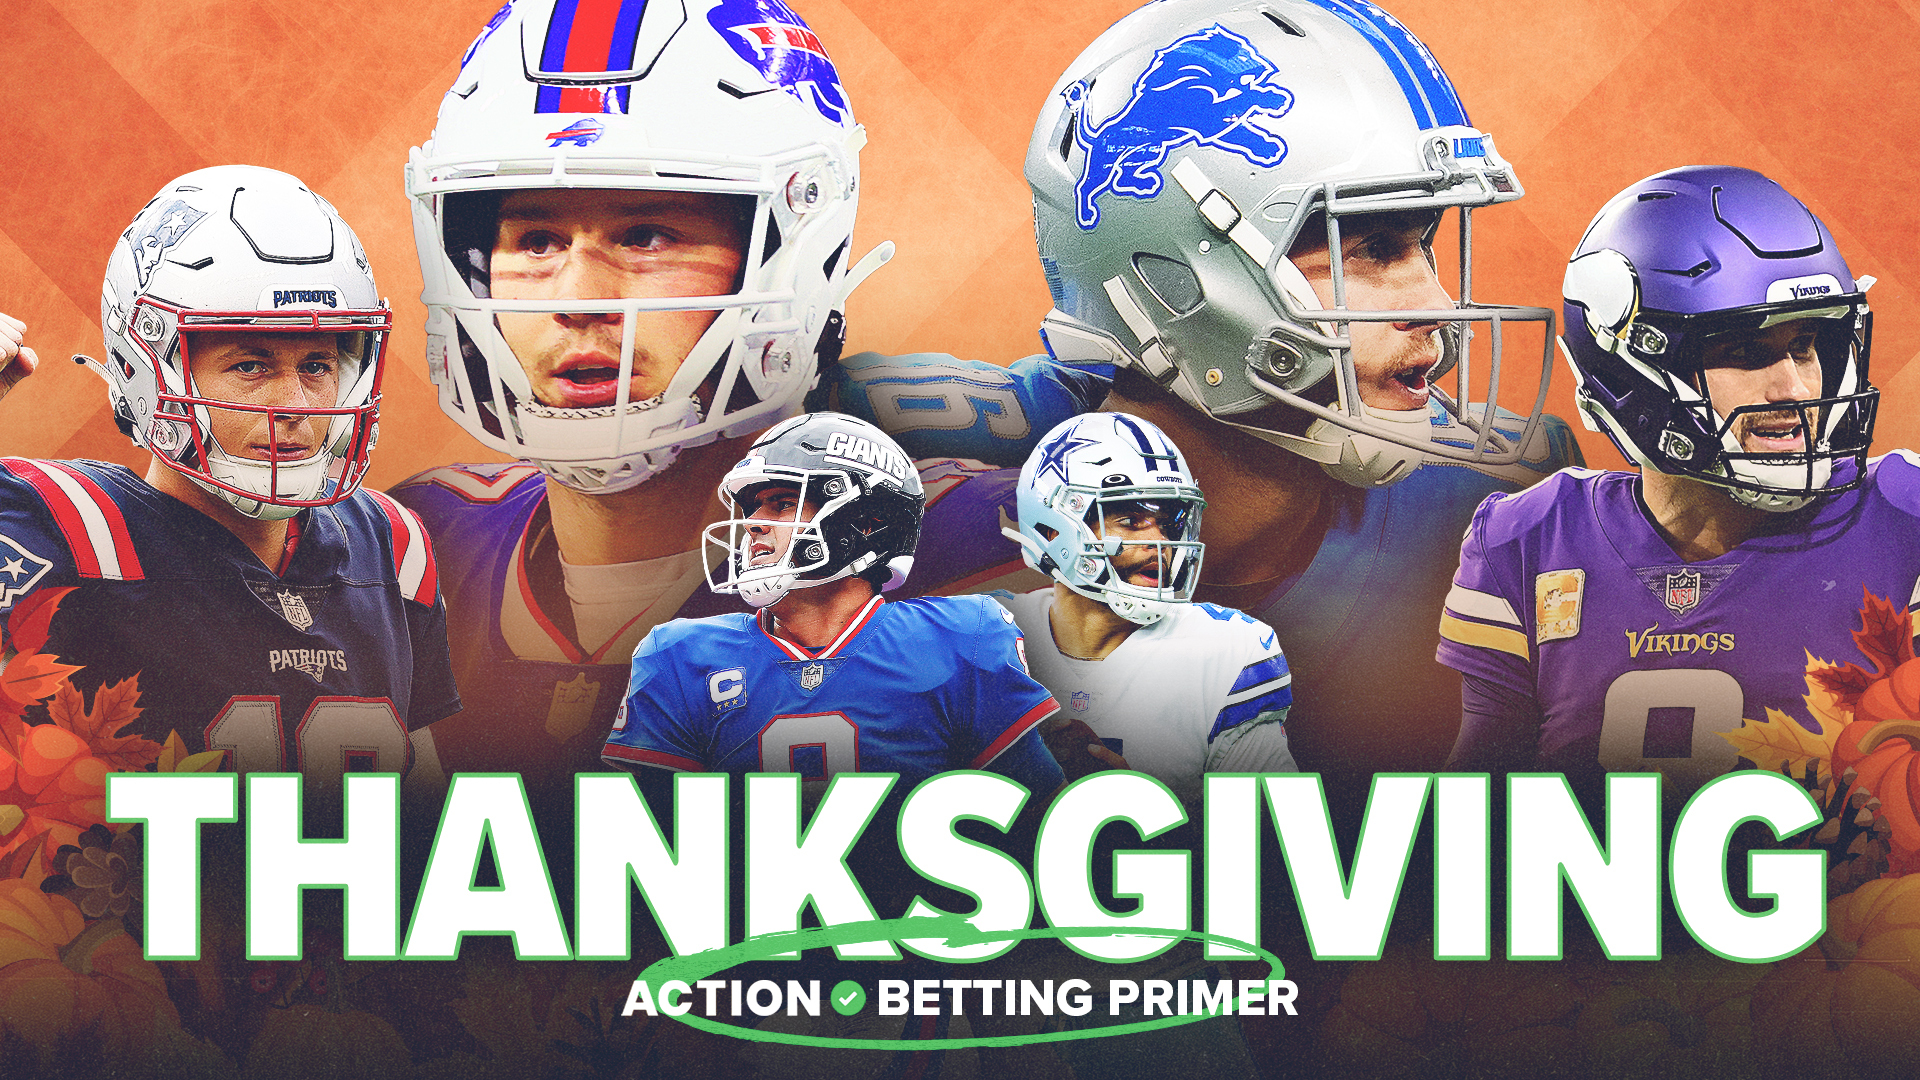 NFL Thanksgiving scores: Vikings take down Patriots, Cowboys beat Giants,  Bills top Lions - The Athletic